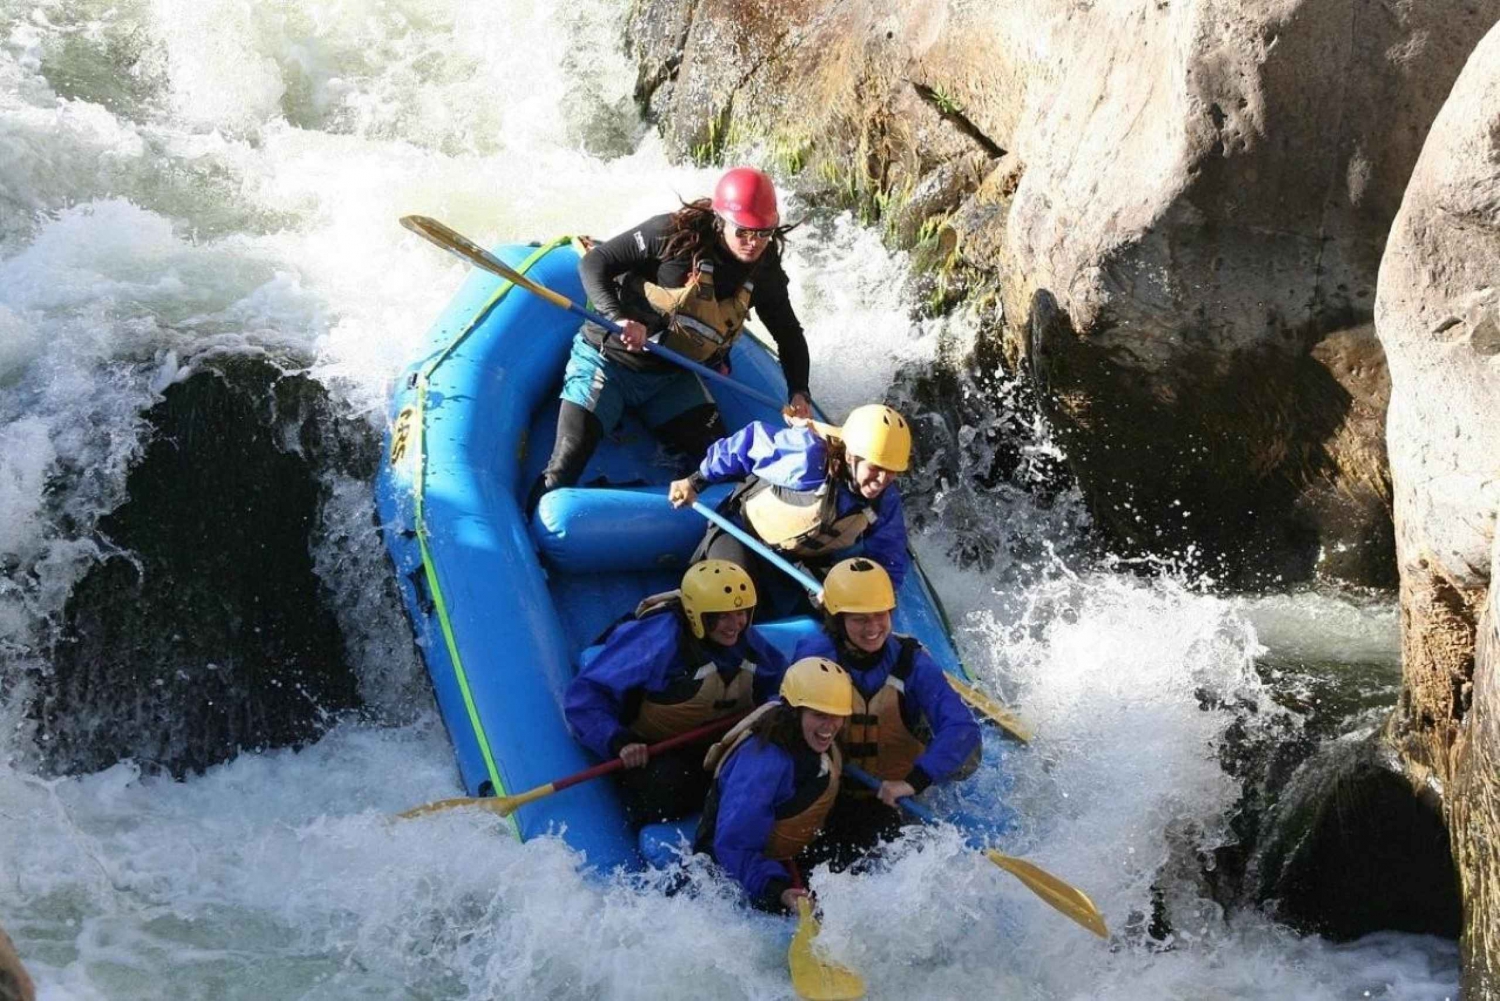 From Arequipa| Rafting in the Chili River